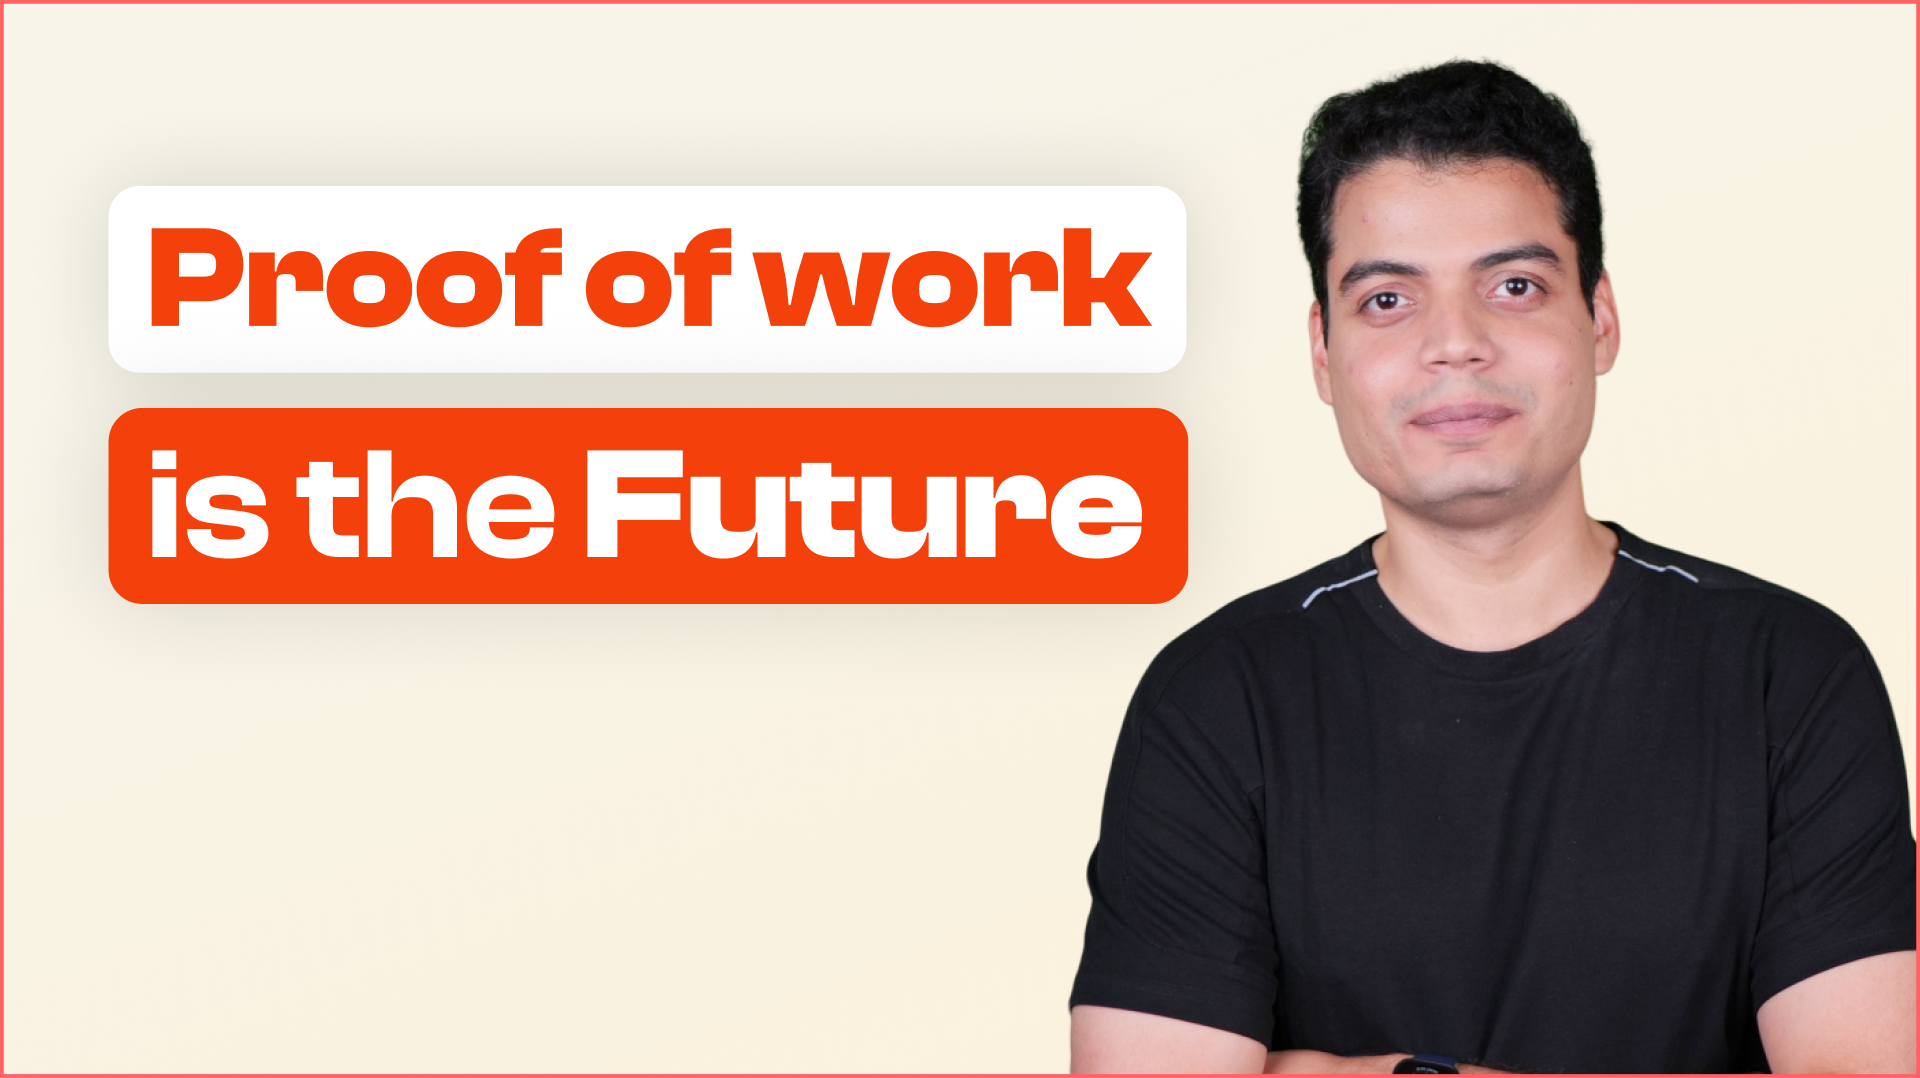 Proof of work is the future